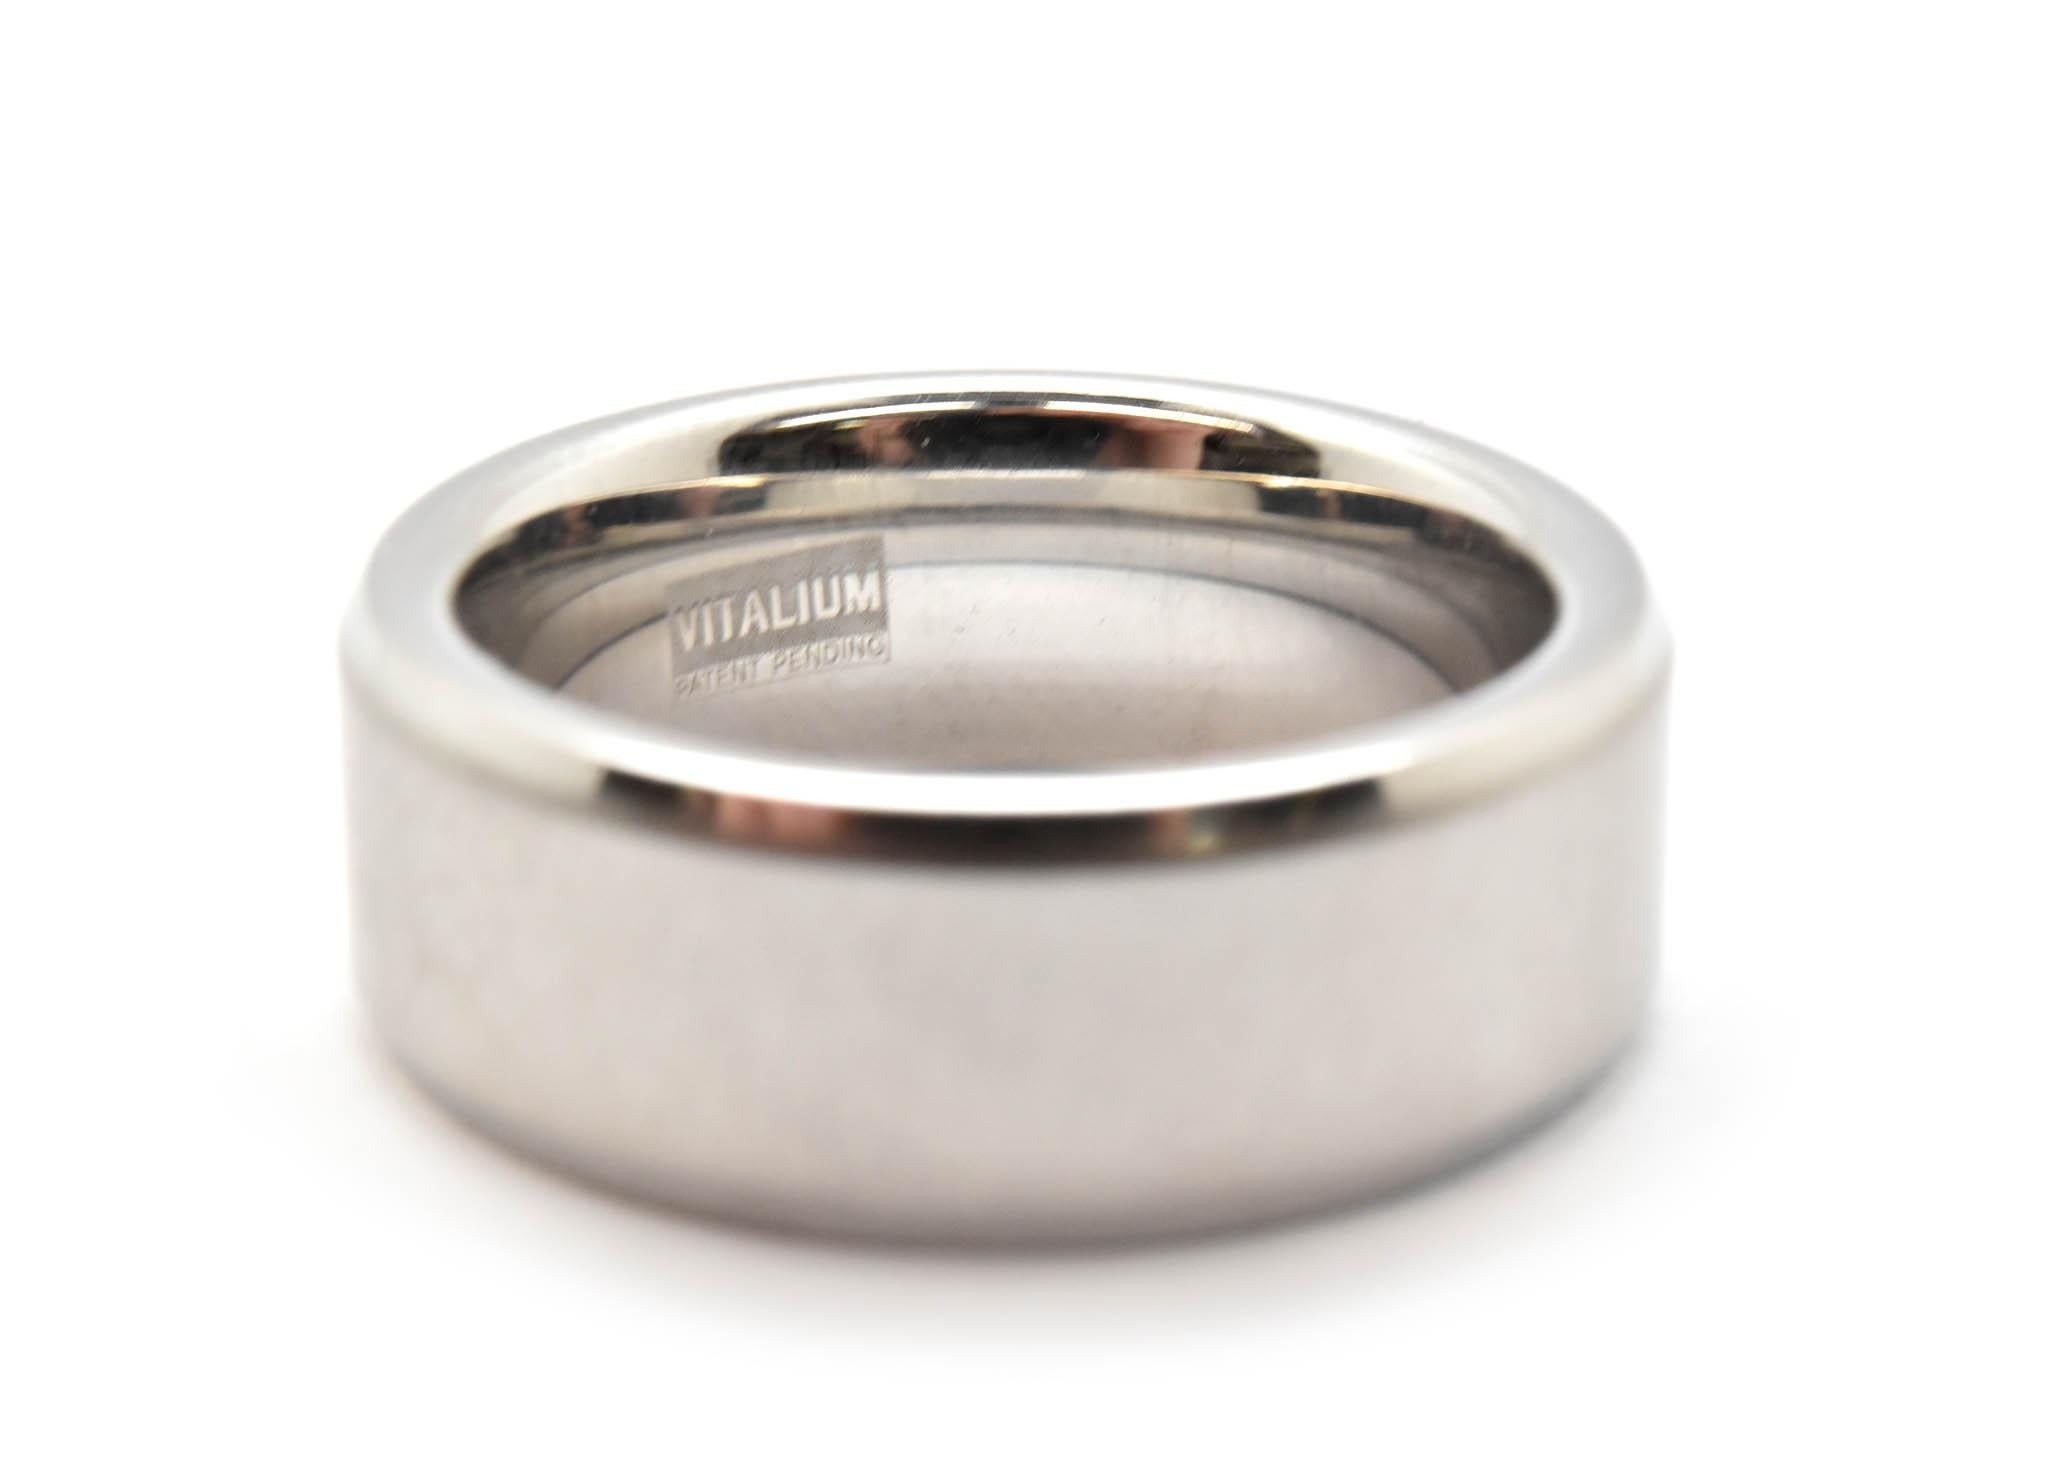 This men’s wedding band is crafted in Vitalium with satin center. It measures 8mm wide and it is a size 8. 